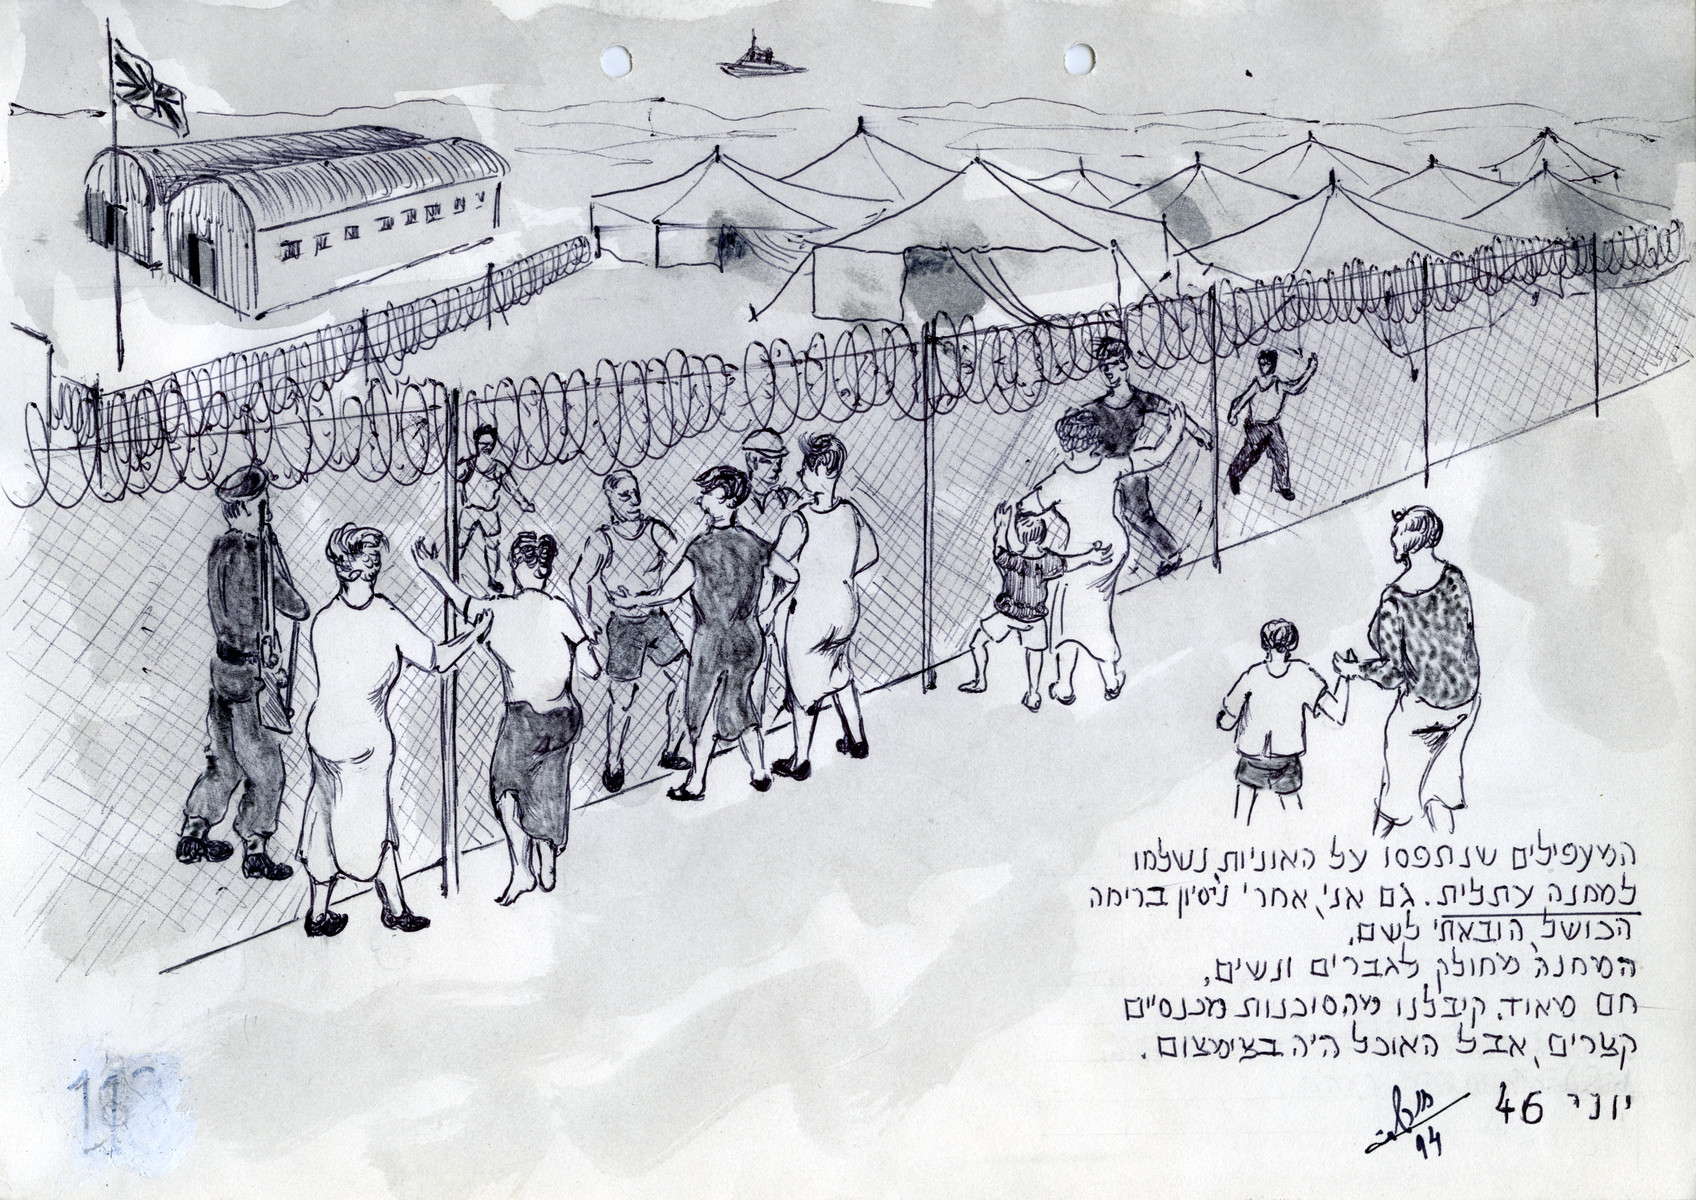 Page of a pictoral memoir drawn by the donor documenting his experiences after the Holocaust.

The drawing depicts Jewish immigrants being held in the Athlit detention center and segretated by gender.